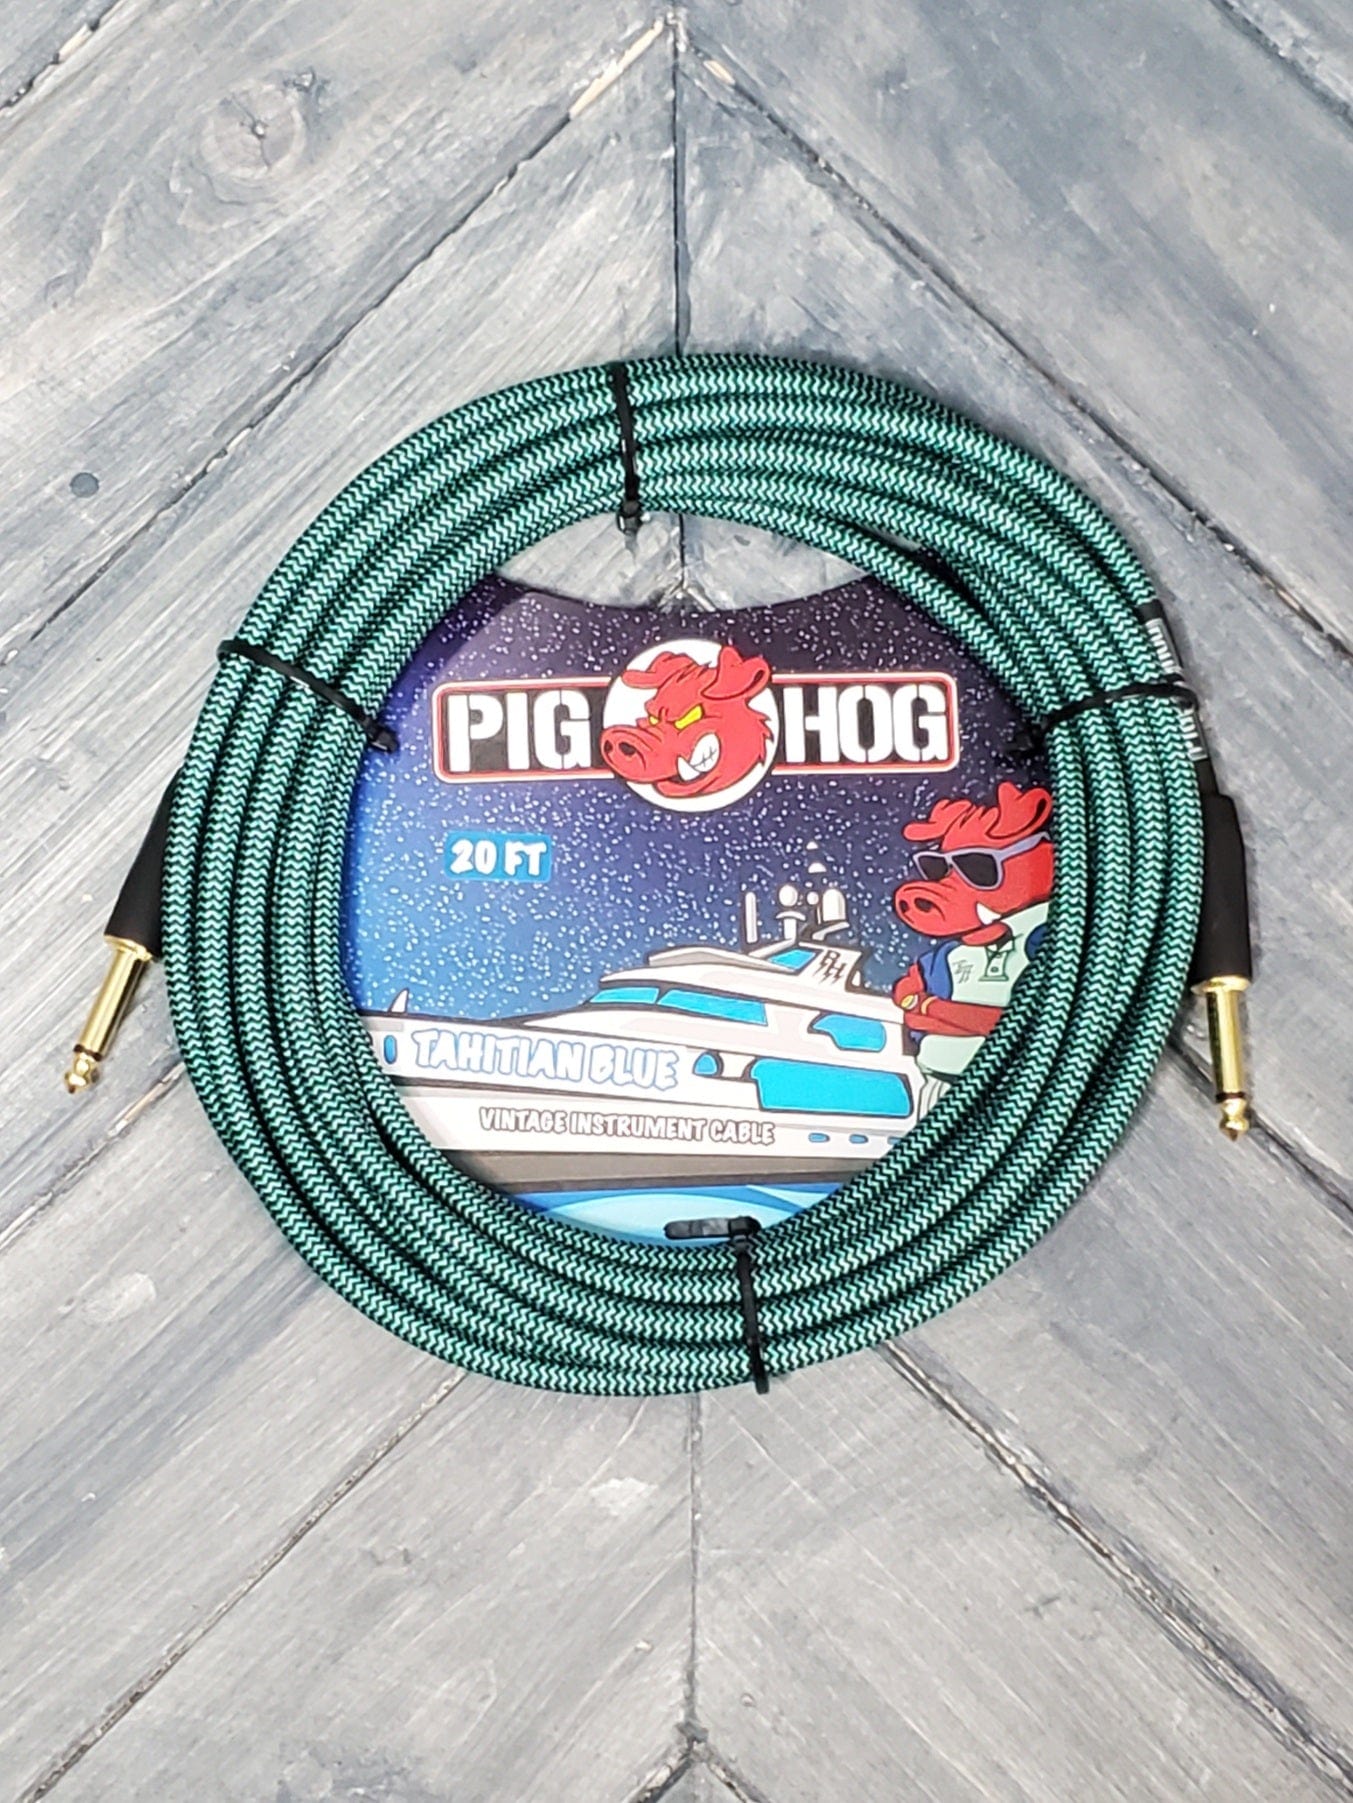 Pig Hog instrument cable Pig Hog PCH20TAB 20-Foot 1/4-1/4 Straight Instrument Cable